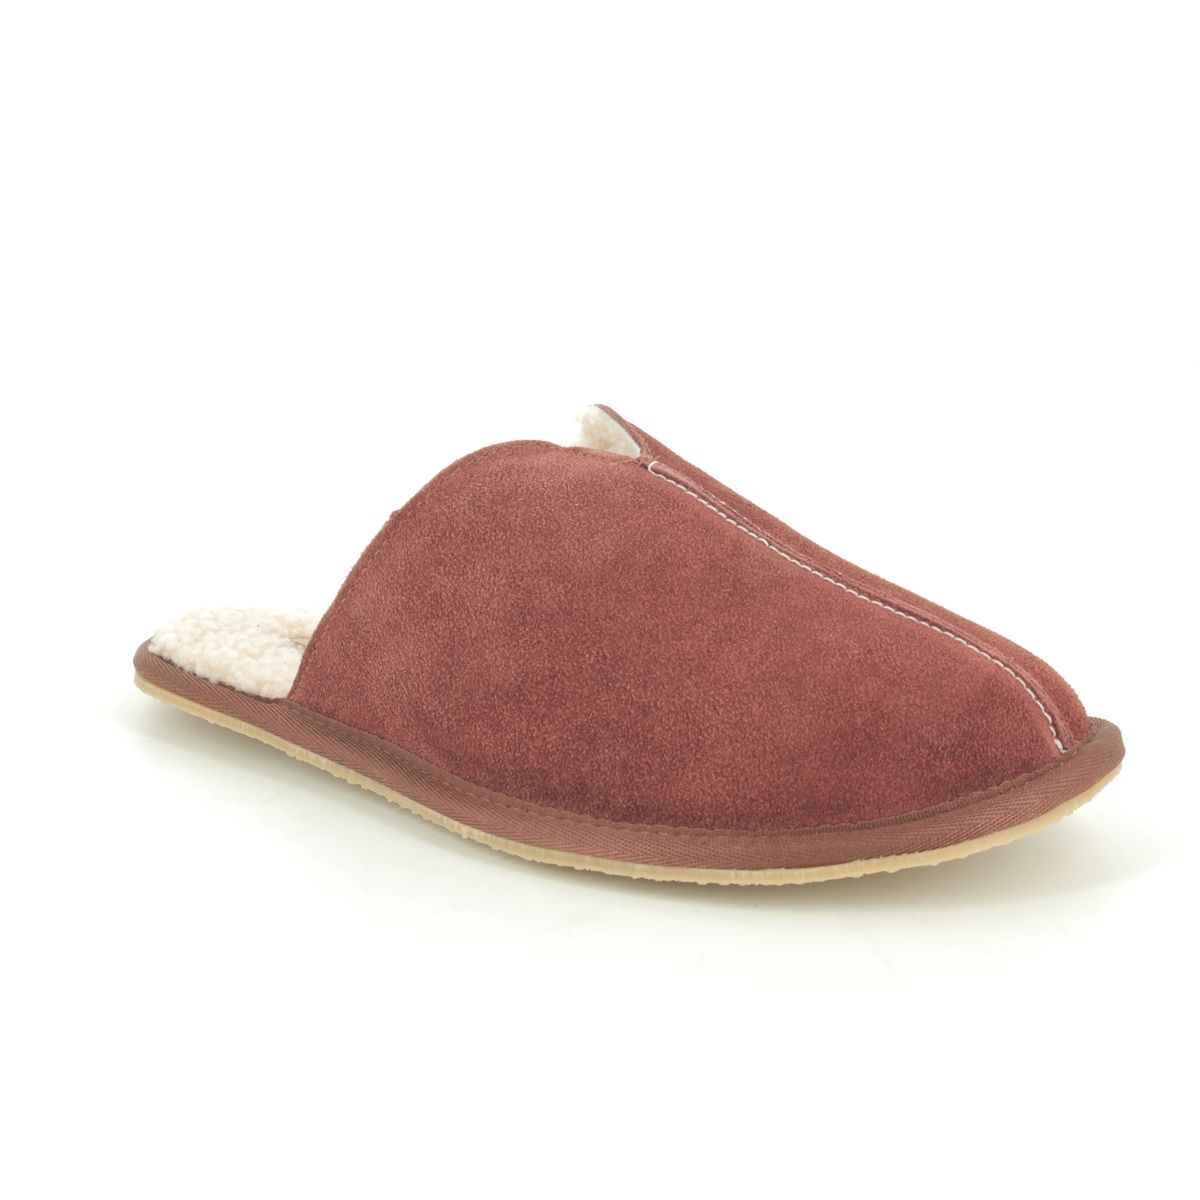 Clarks Kite Seam G Fit Brown Suede slippers